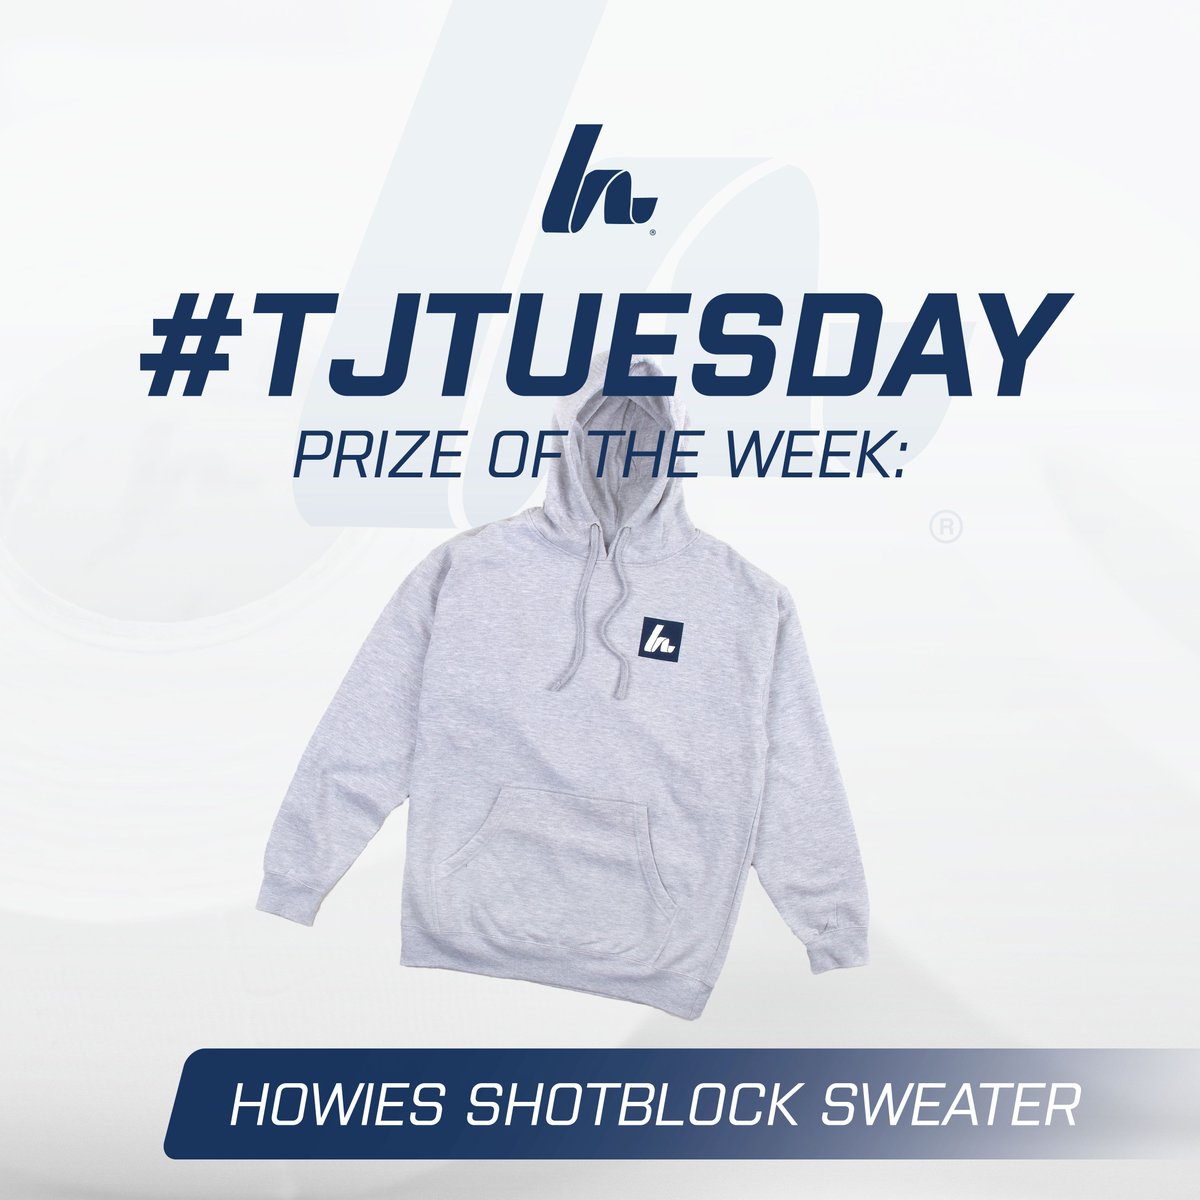 It's TJ Tuesday! And we got a good prize for you this week! We want to see your best tape jobs; wrists, ankles, fingers, etc.👀 Send us your best TJ for a chance to win! This week's winner will receive a Shot Block Sweater 💥#StickWithTheBest